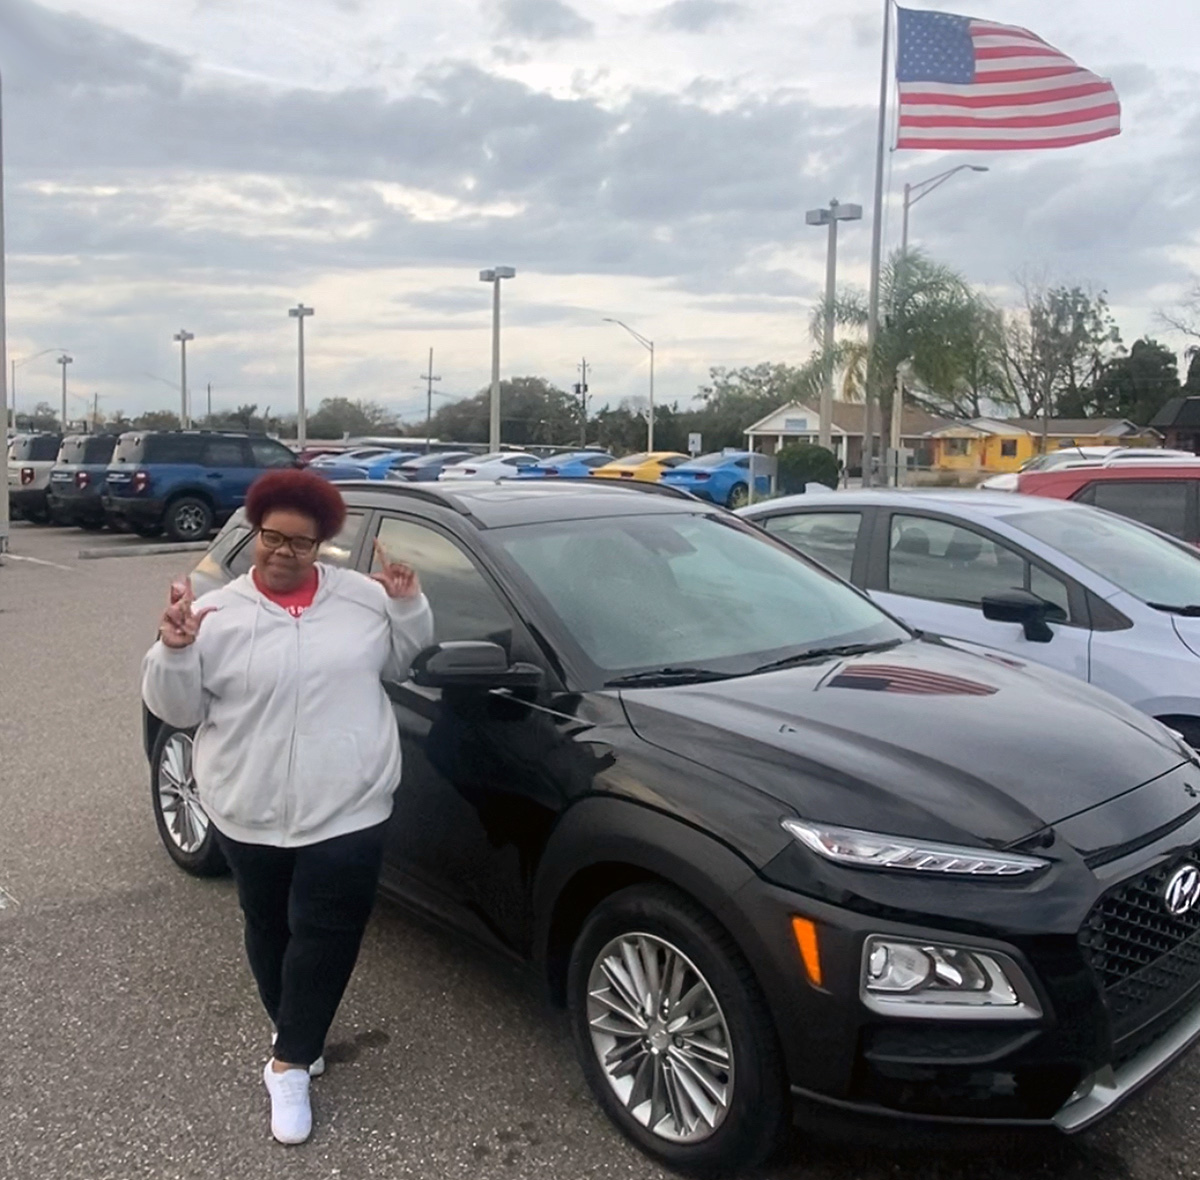 It's what we do! #HappyCustomers & #GreatService just go together at #LakelandAutomall, that's why Brianna McDonald came to us for her #HyundaiKona with a #GreatDeal & buying is #Fast, #Fun & #Easy - #WeGotYouCovered! #ThankYou Brianna & #Enjoy - We're here for you! #ShopOnline